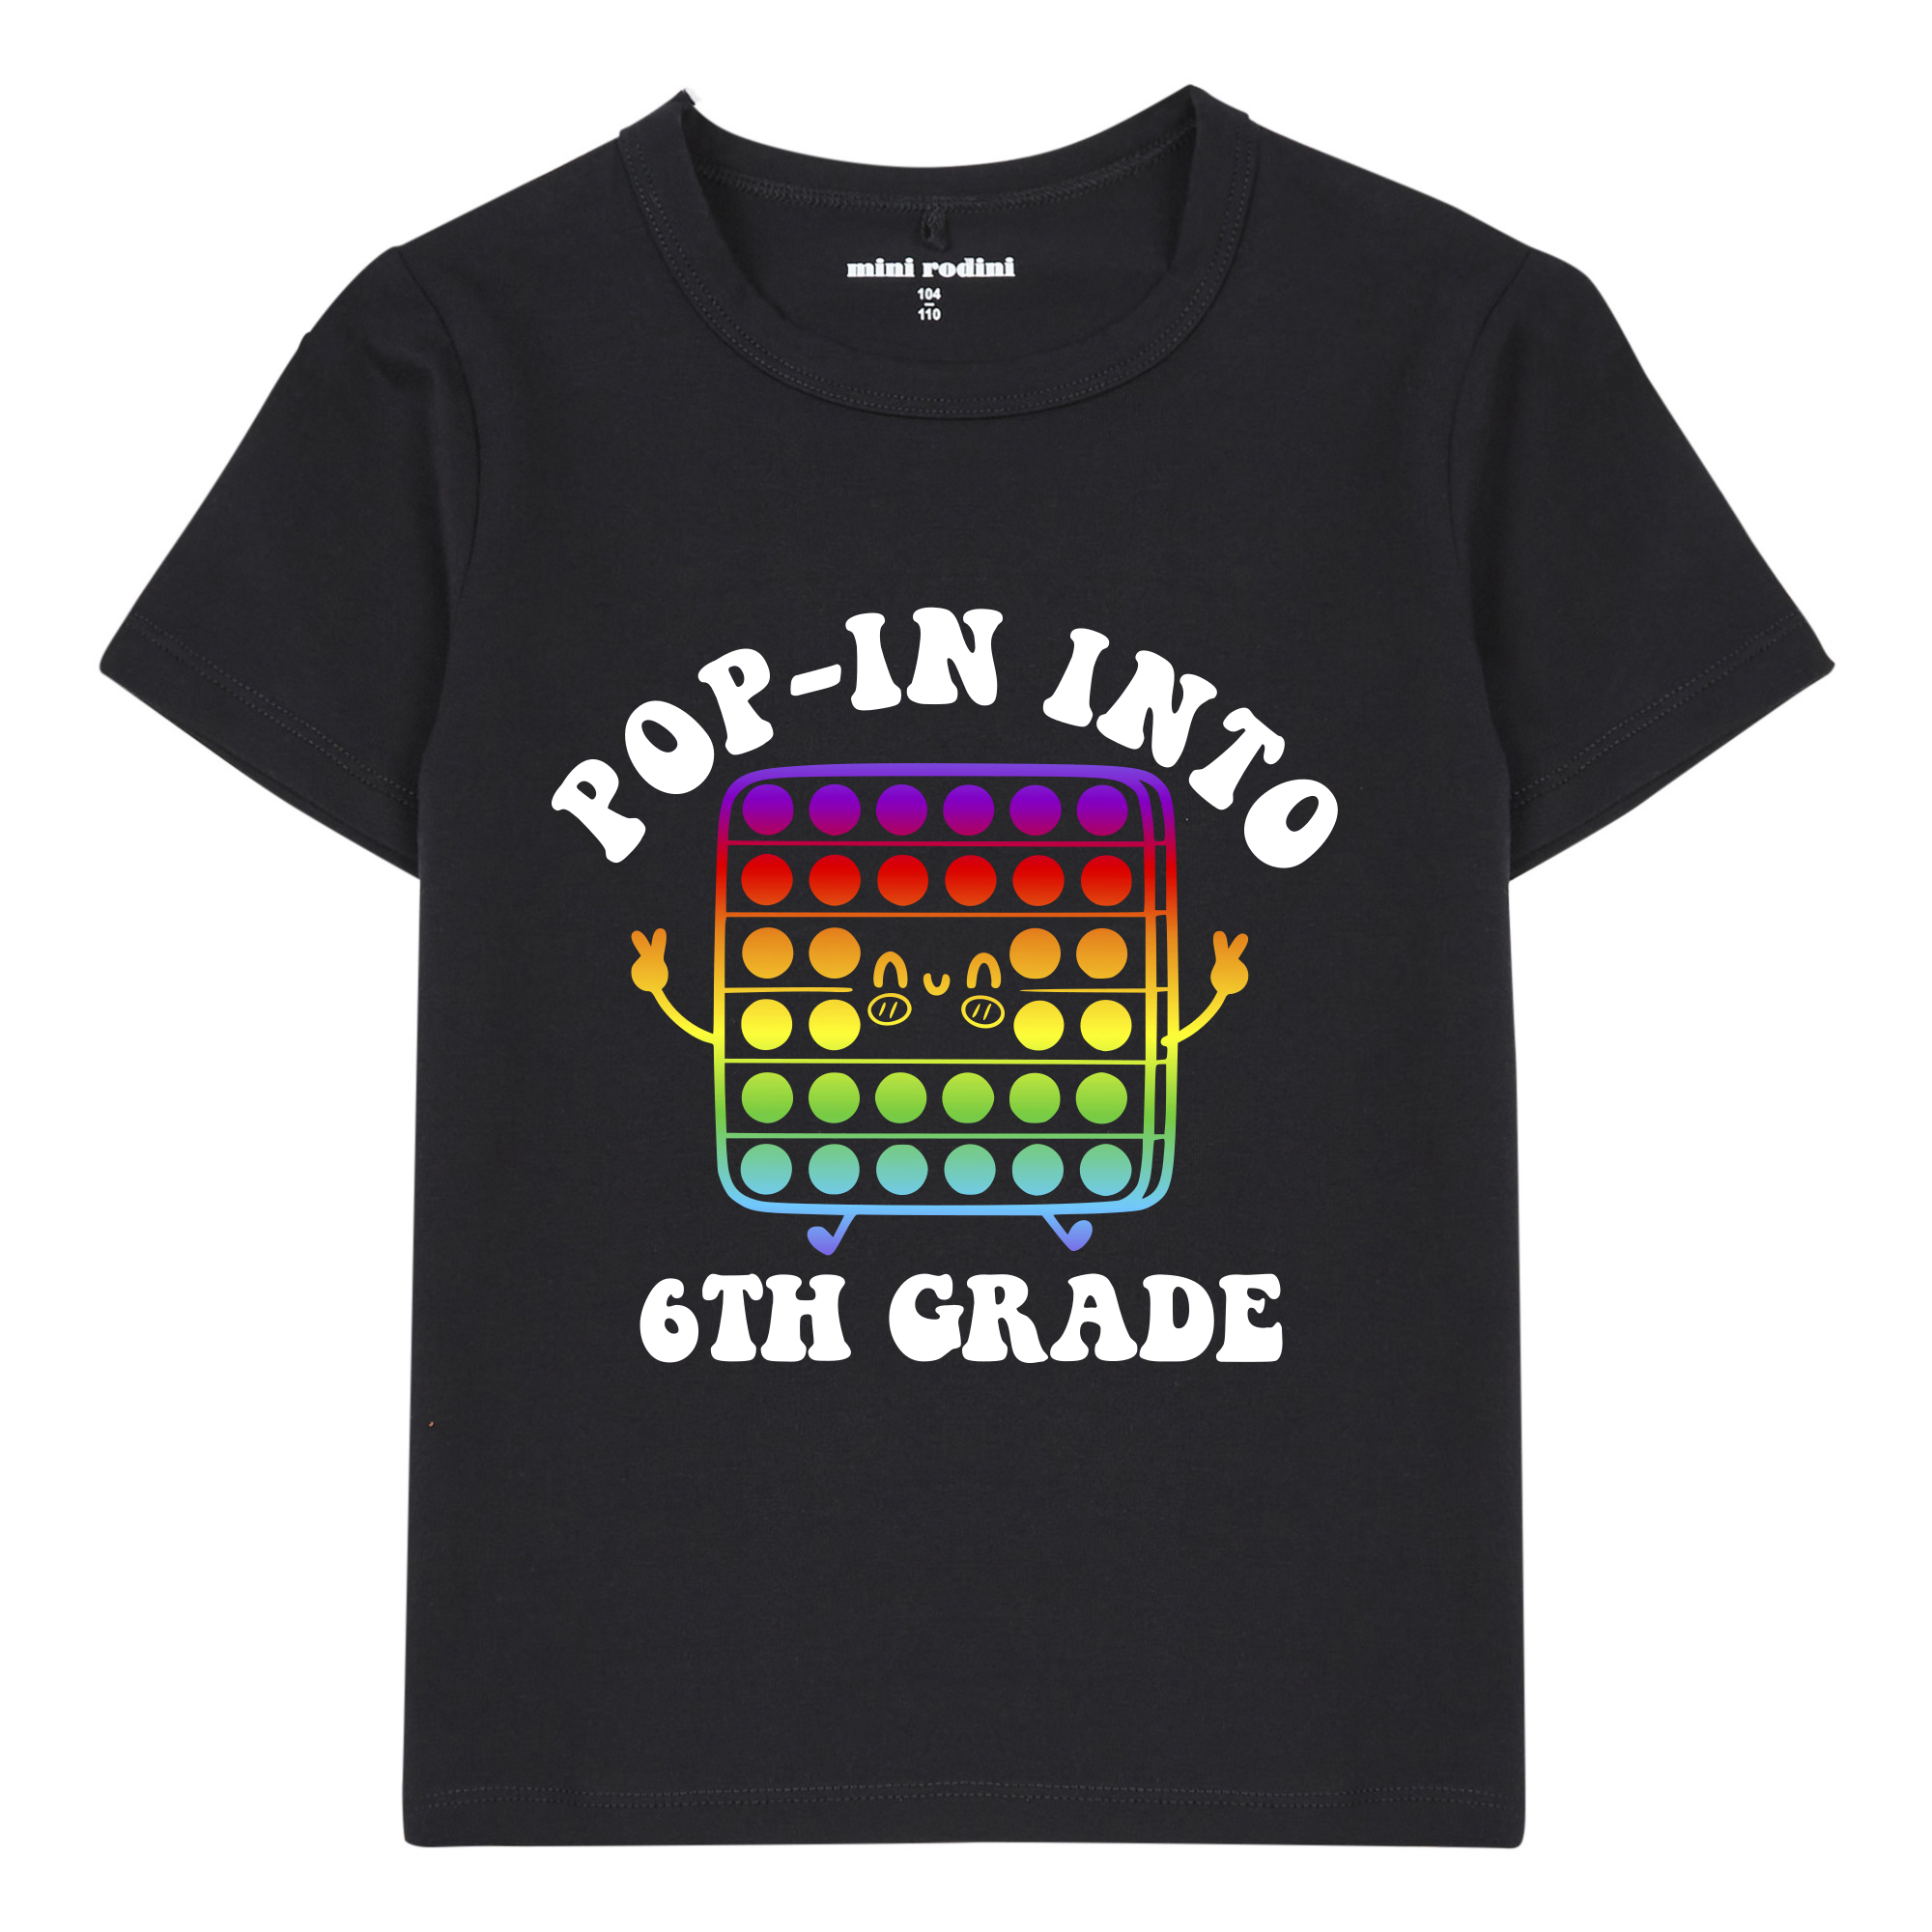 POP-IN INTO 6TH GRADE KIDS T-SHIRT